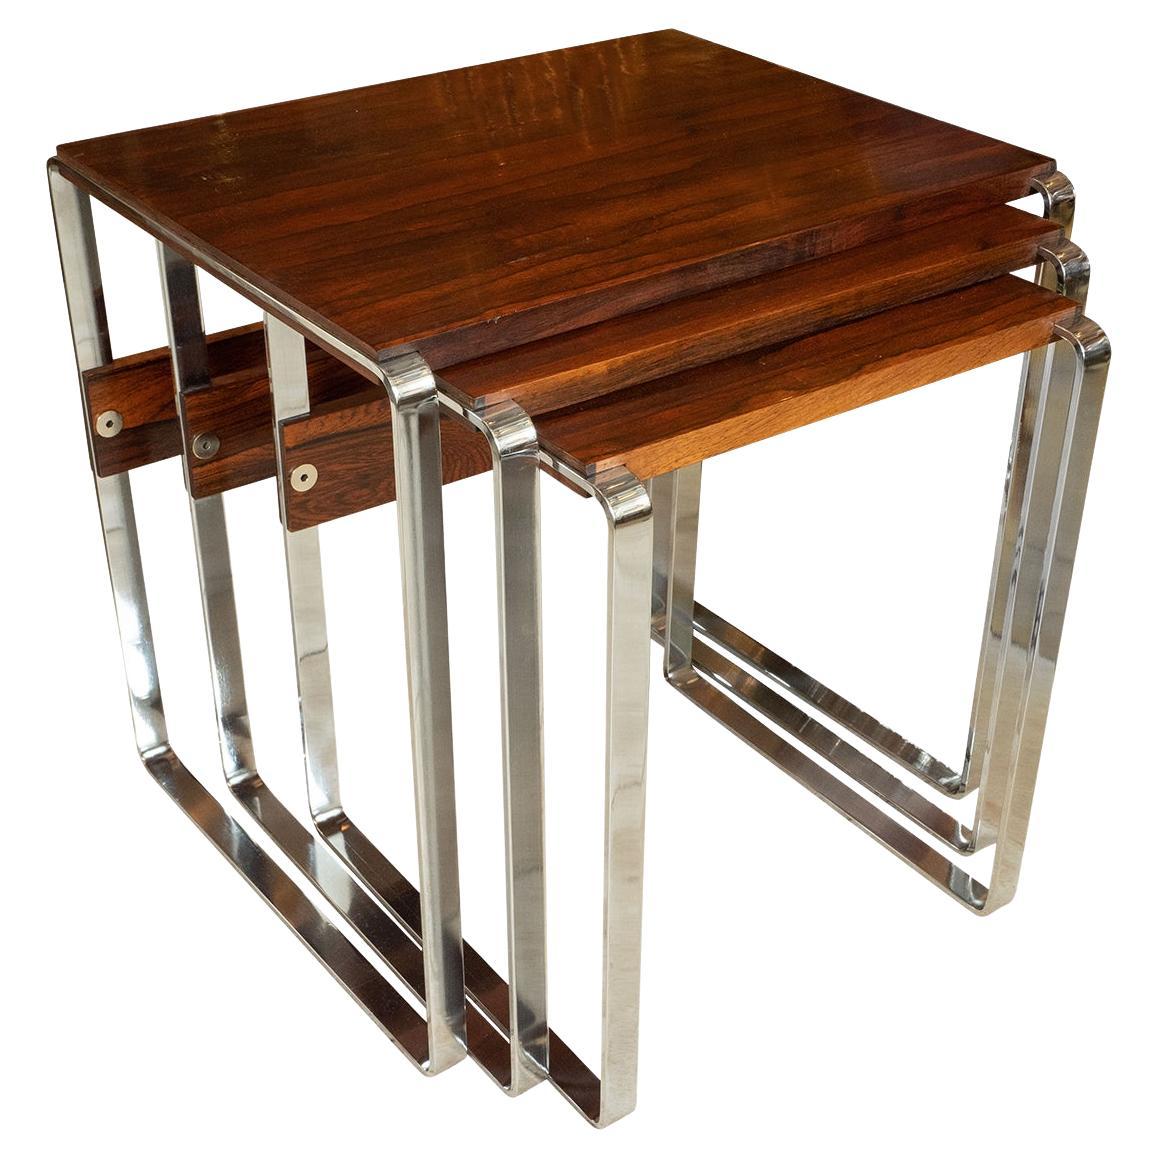 Trio of wood and nickel nesting tables